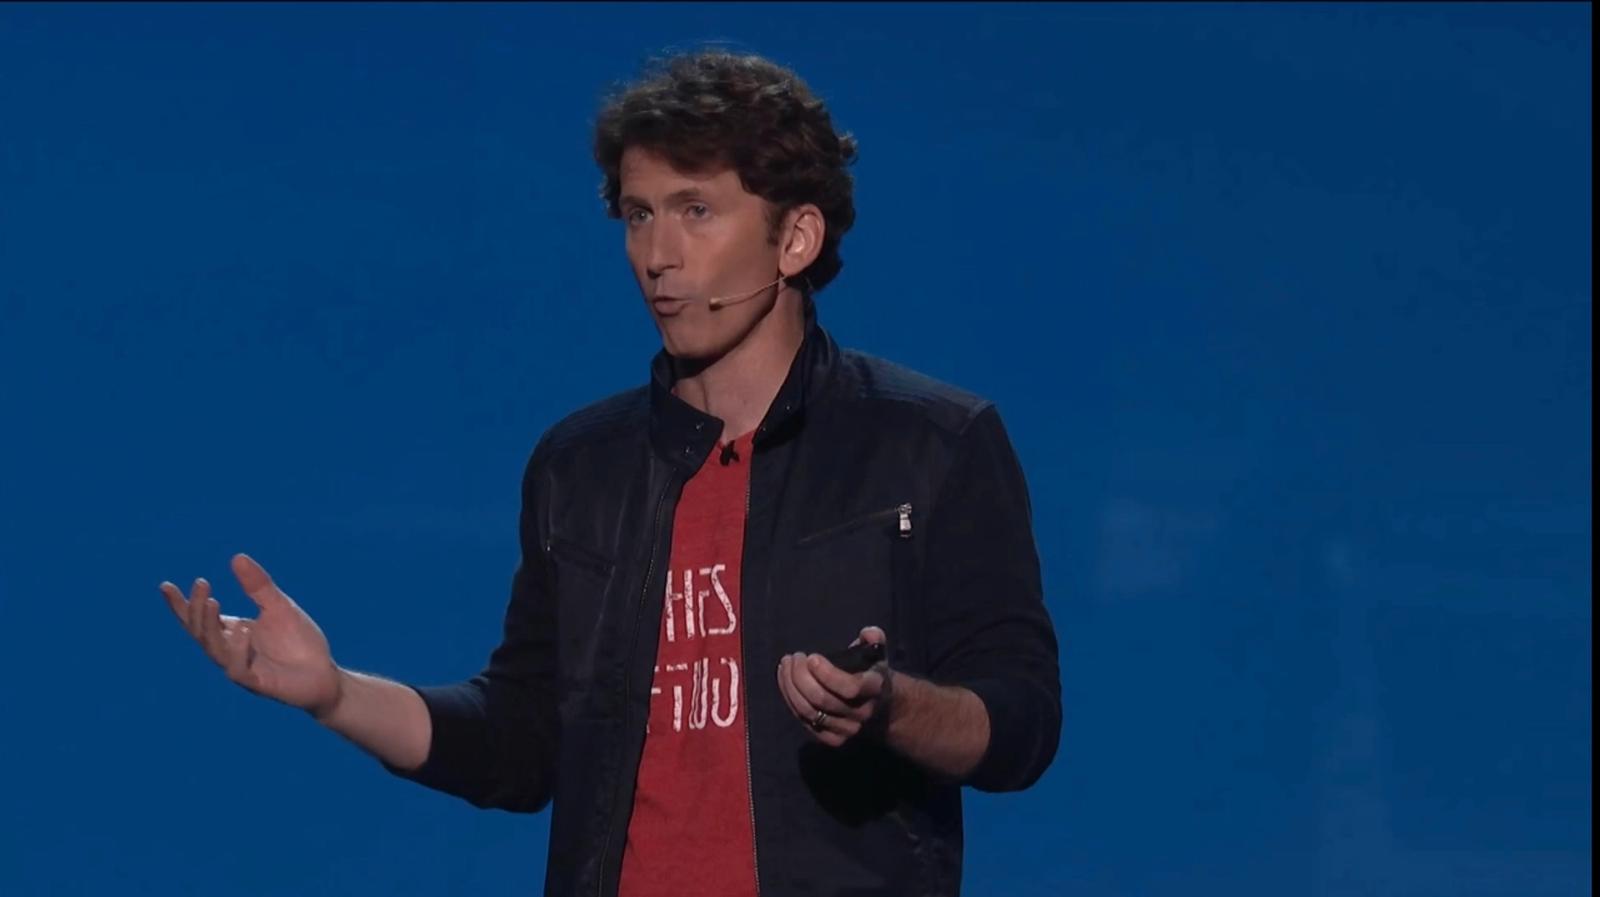 Todd Howard on stage E3 2015